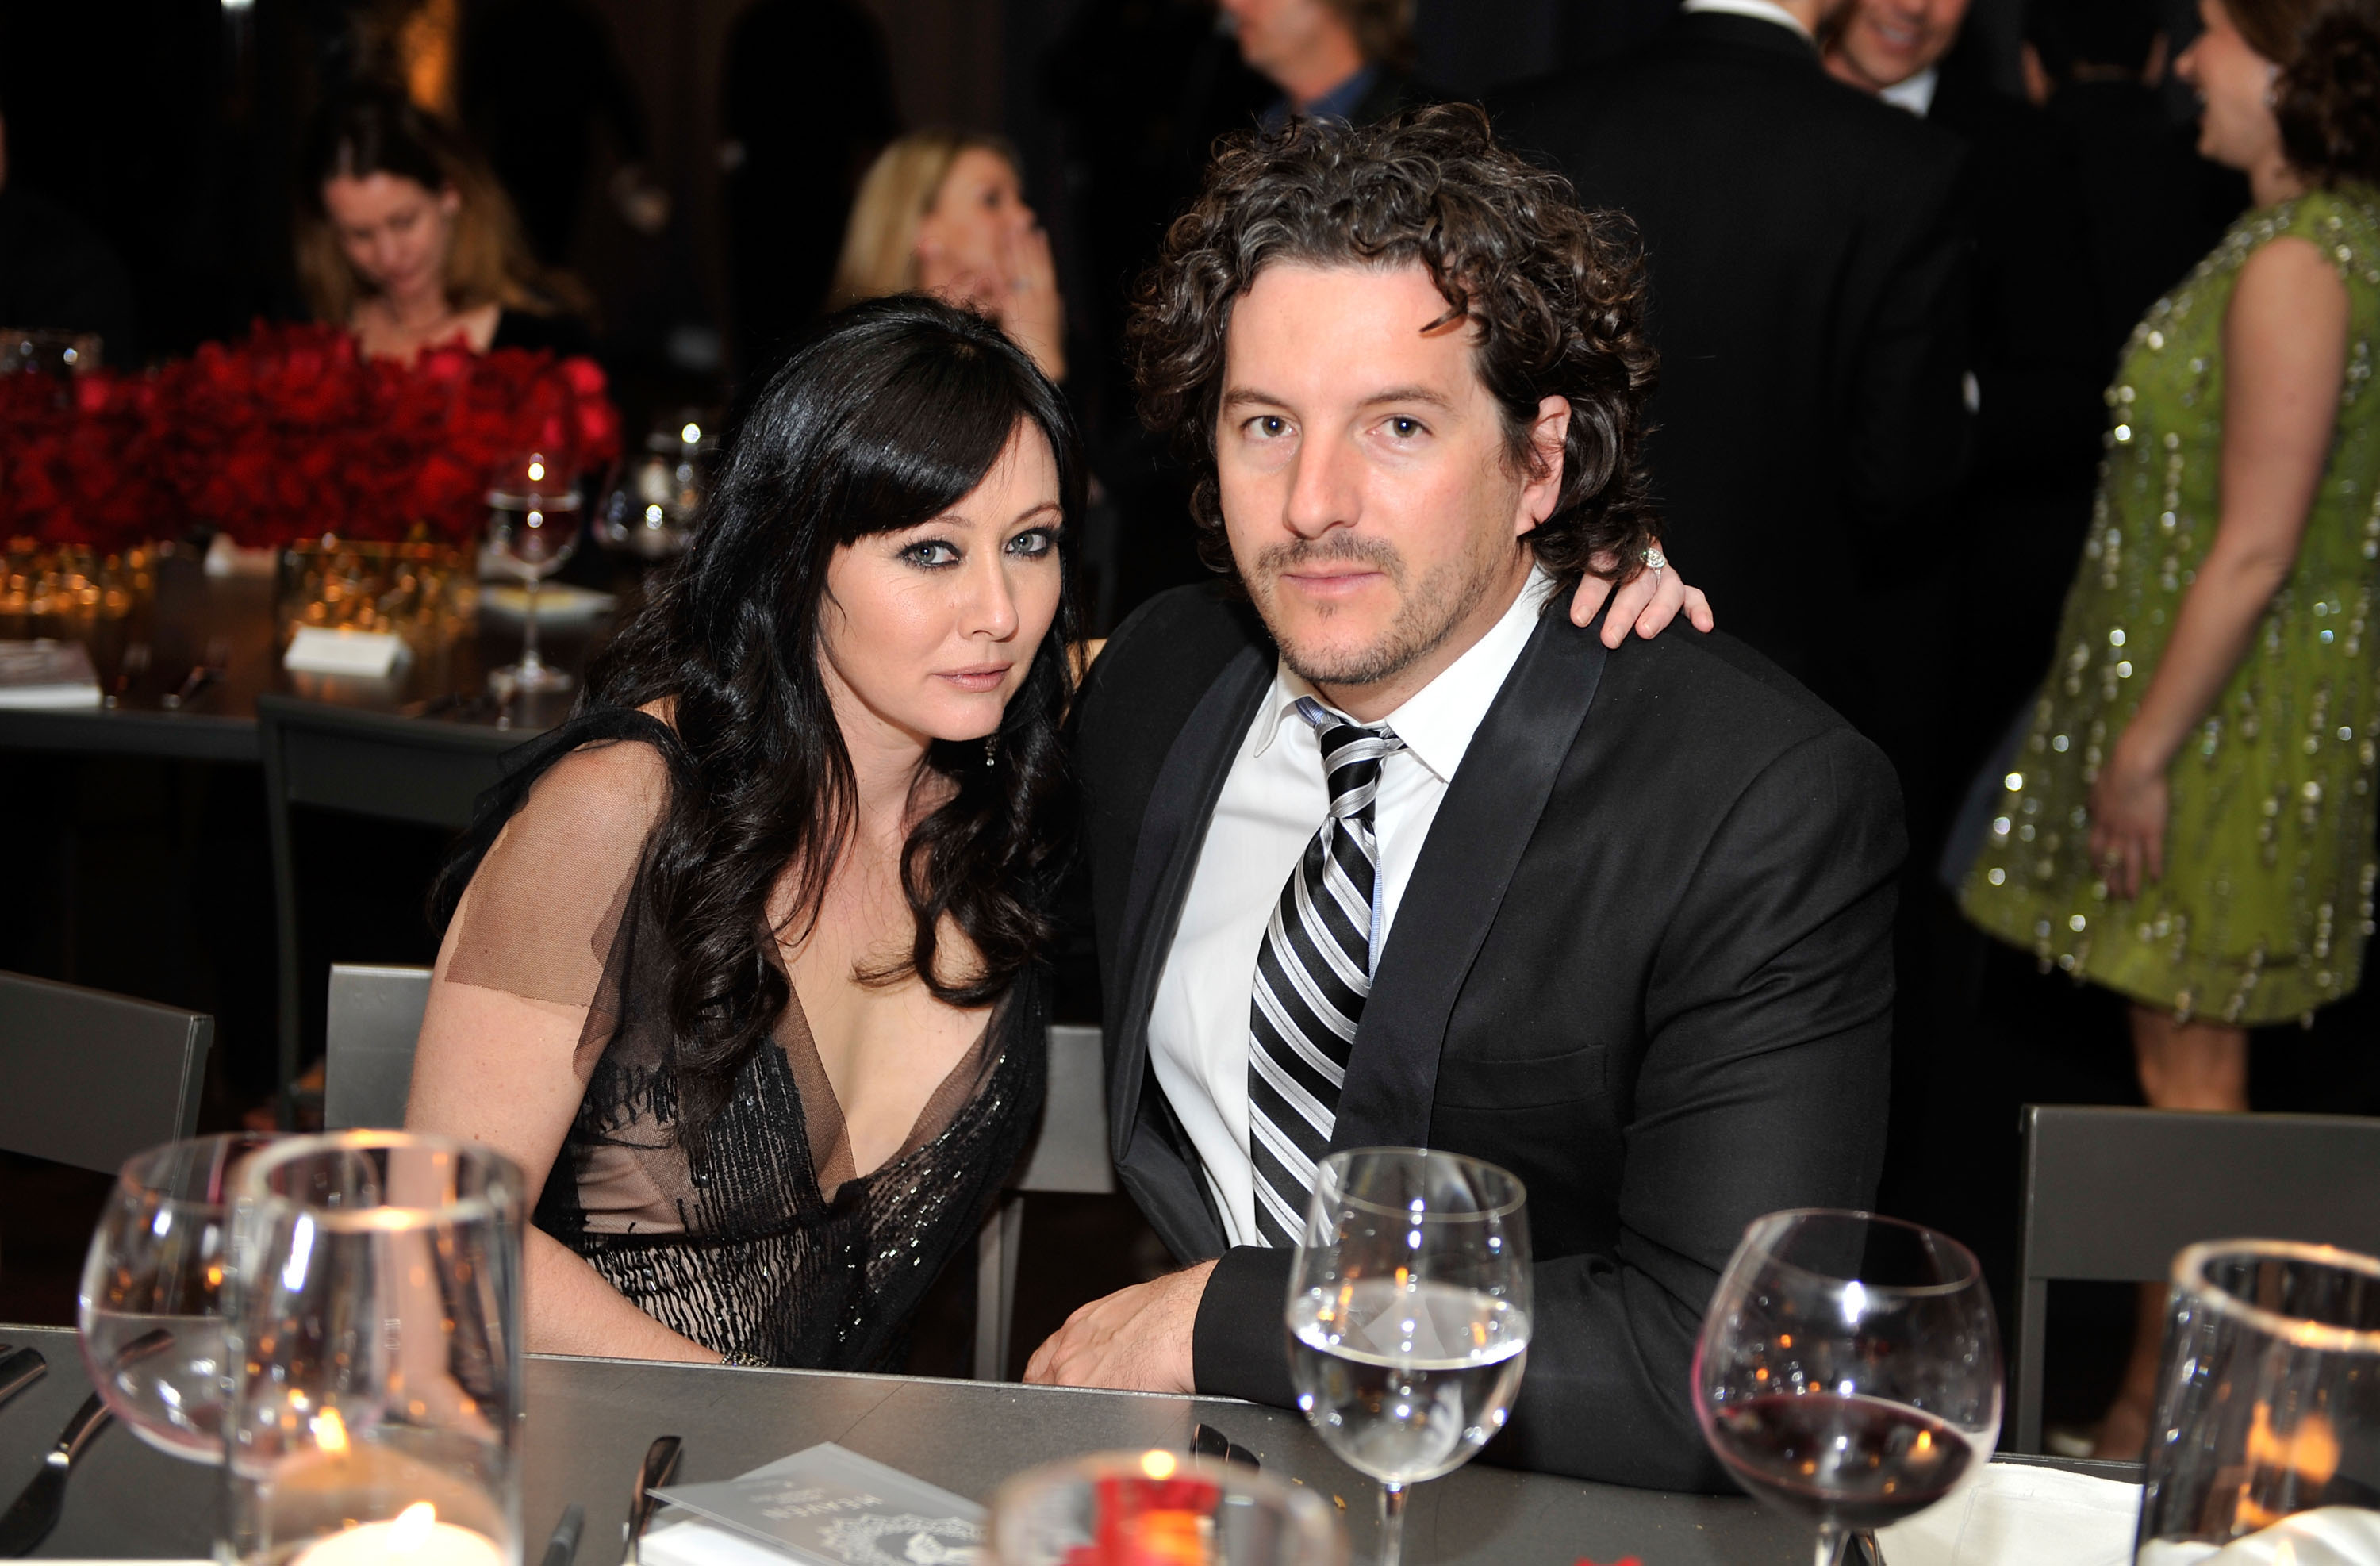 Shannen Doherty and Kurt Iswarienko at The Art of Elysium's 3rd Annual Black Tie Charity Gala on January 16, 2010, in Beverly Hills, California. | Source: Getty Images